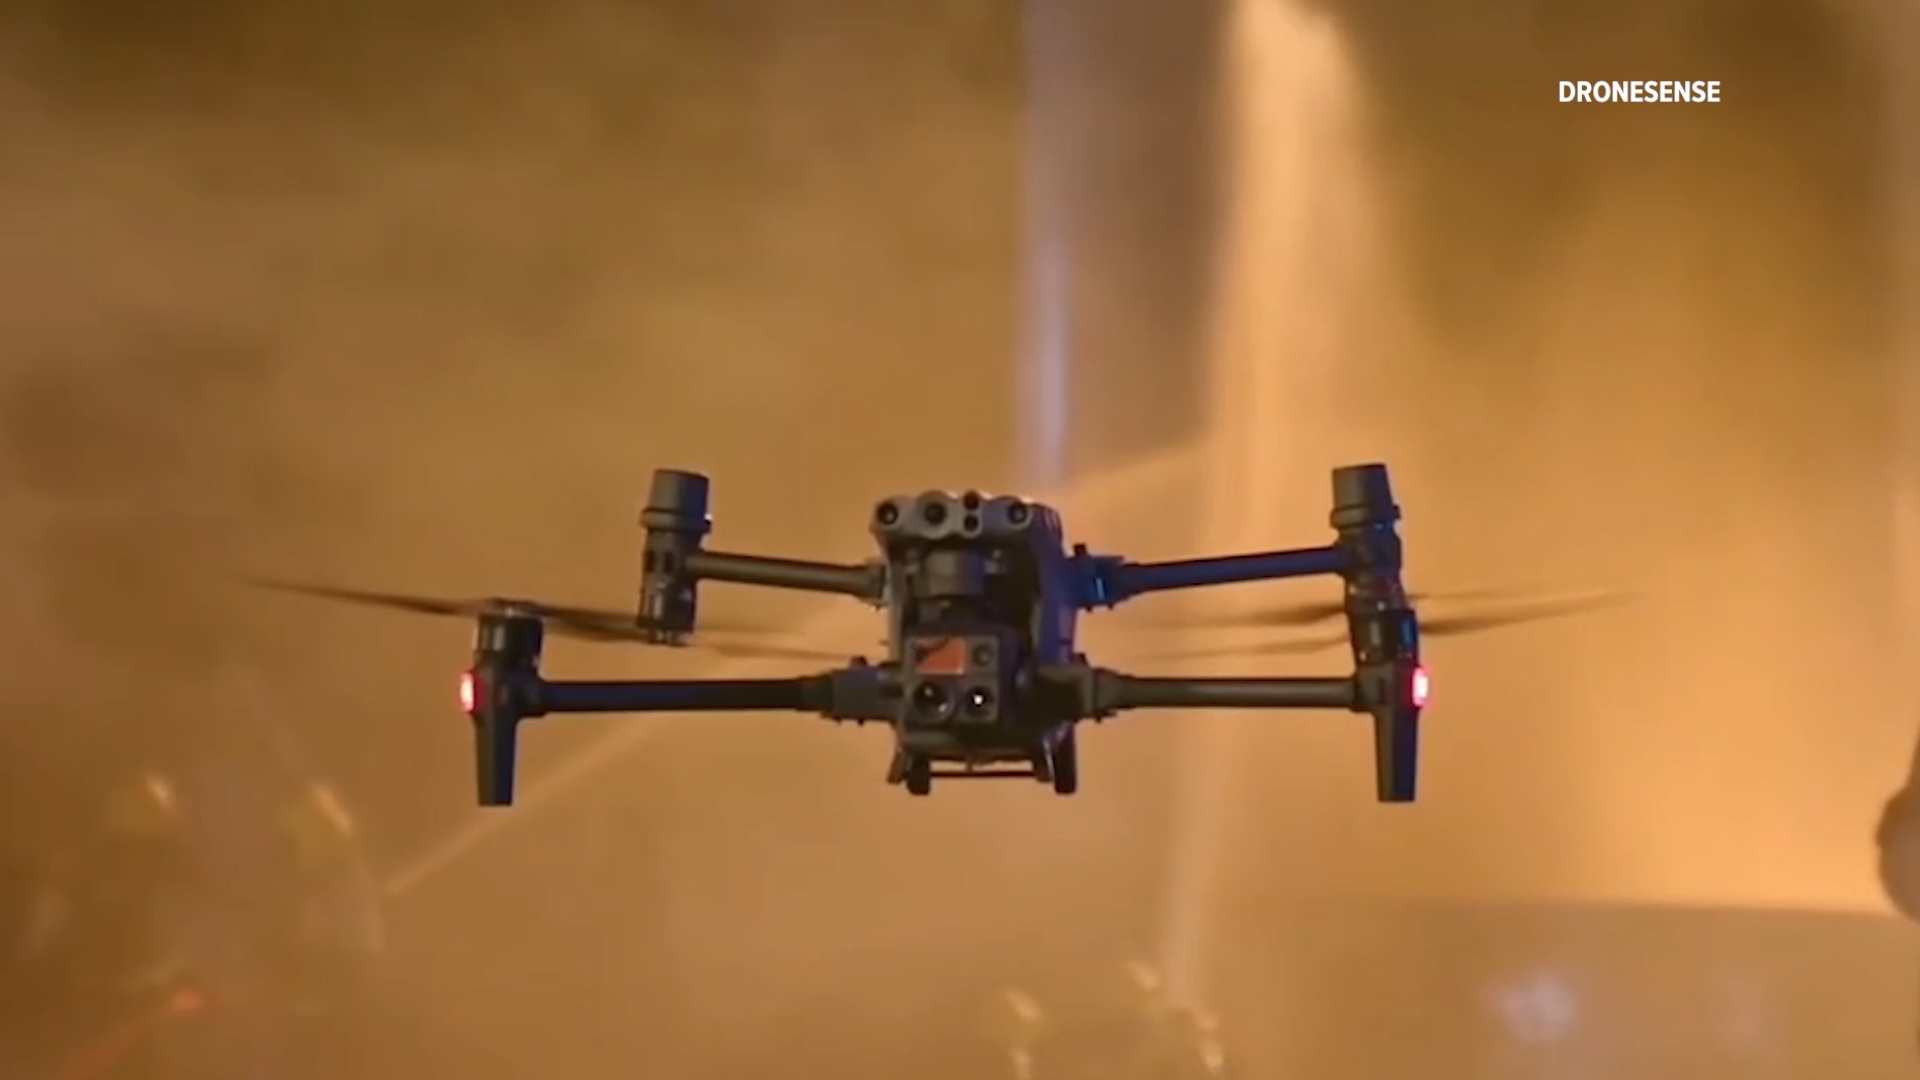 Drones can be used to keep first responders safe and help in many situations